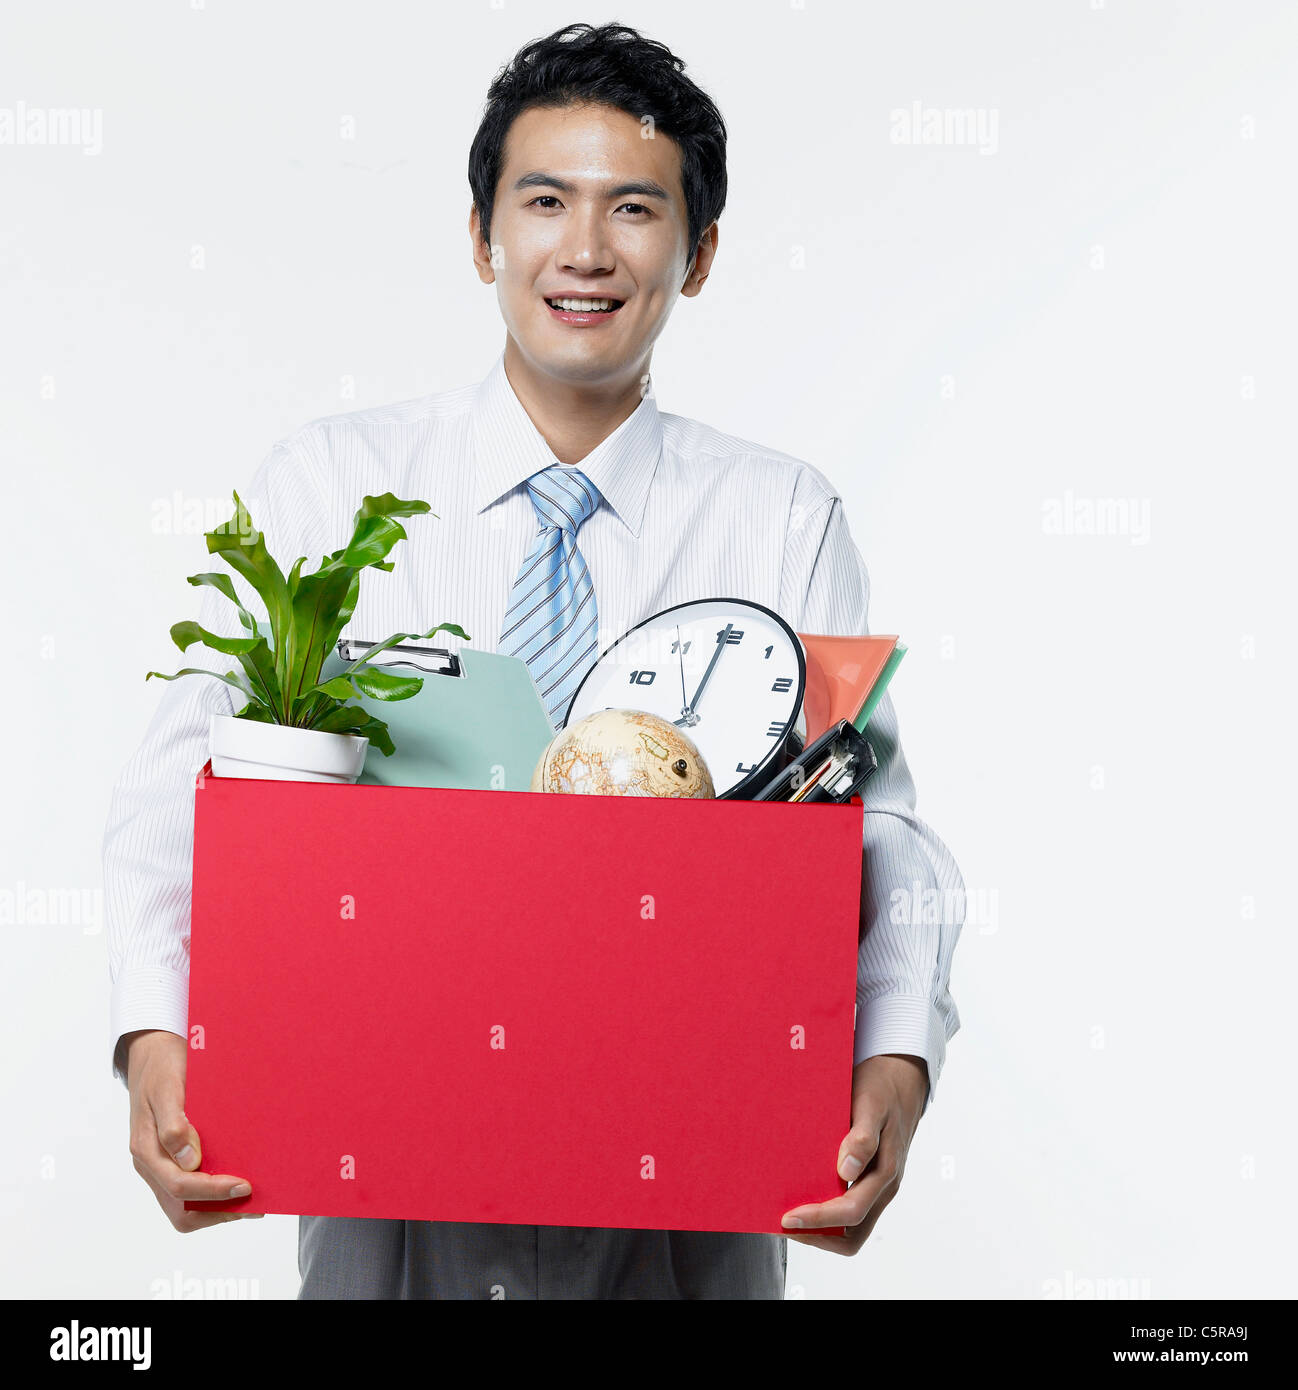 A man holding a box of many things Stock Photo